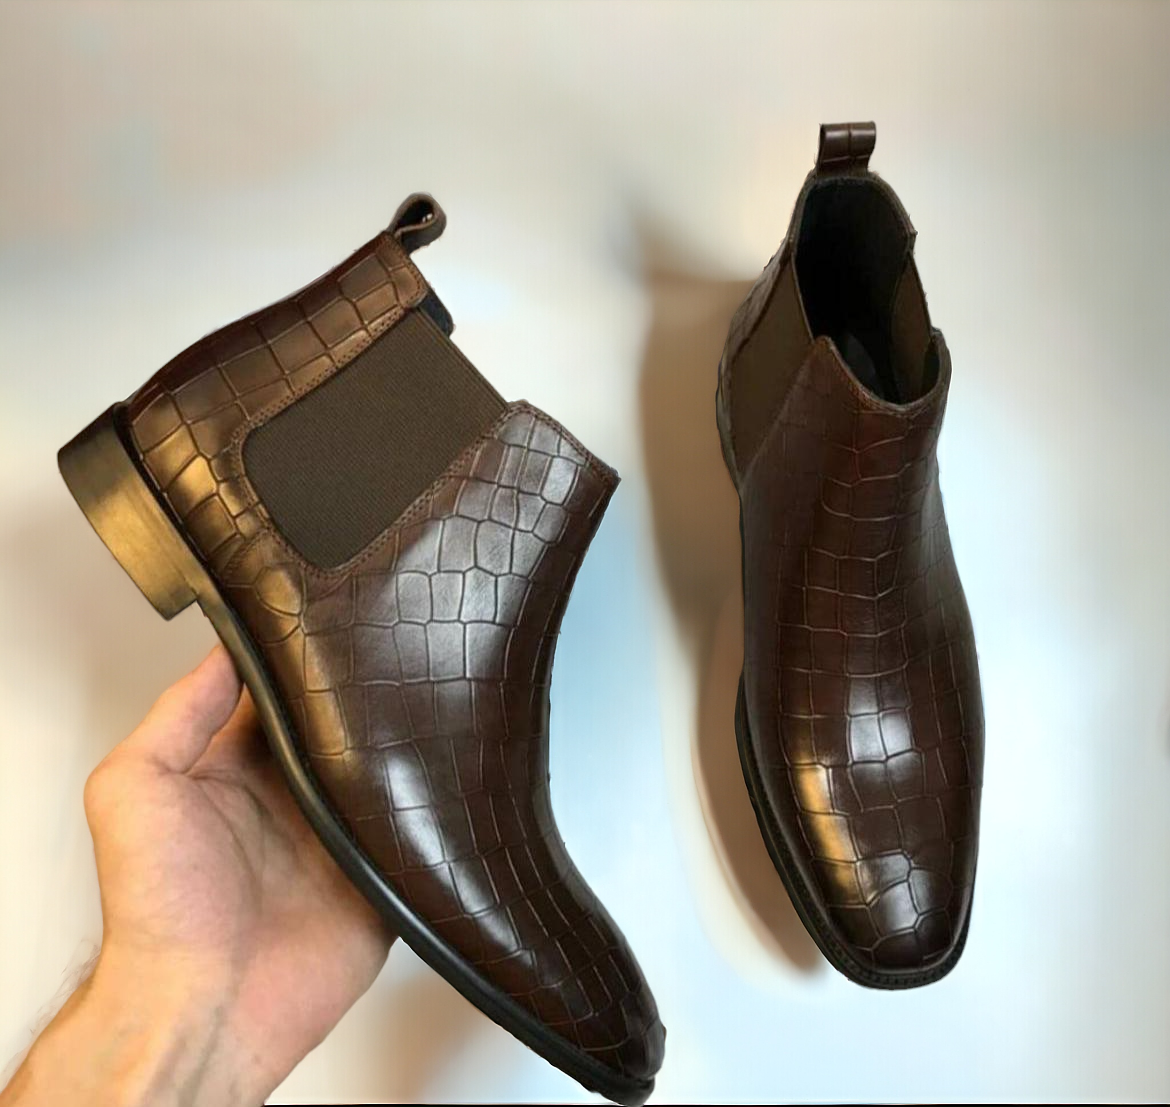 Jack Marc Faux Leather Crocs Chelsea Boots Perfect Fit for Every Occasion